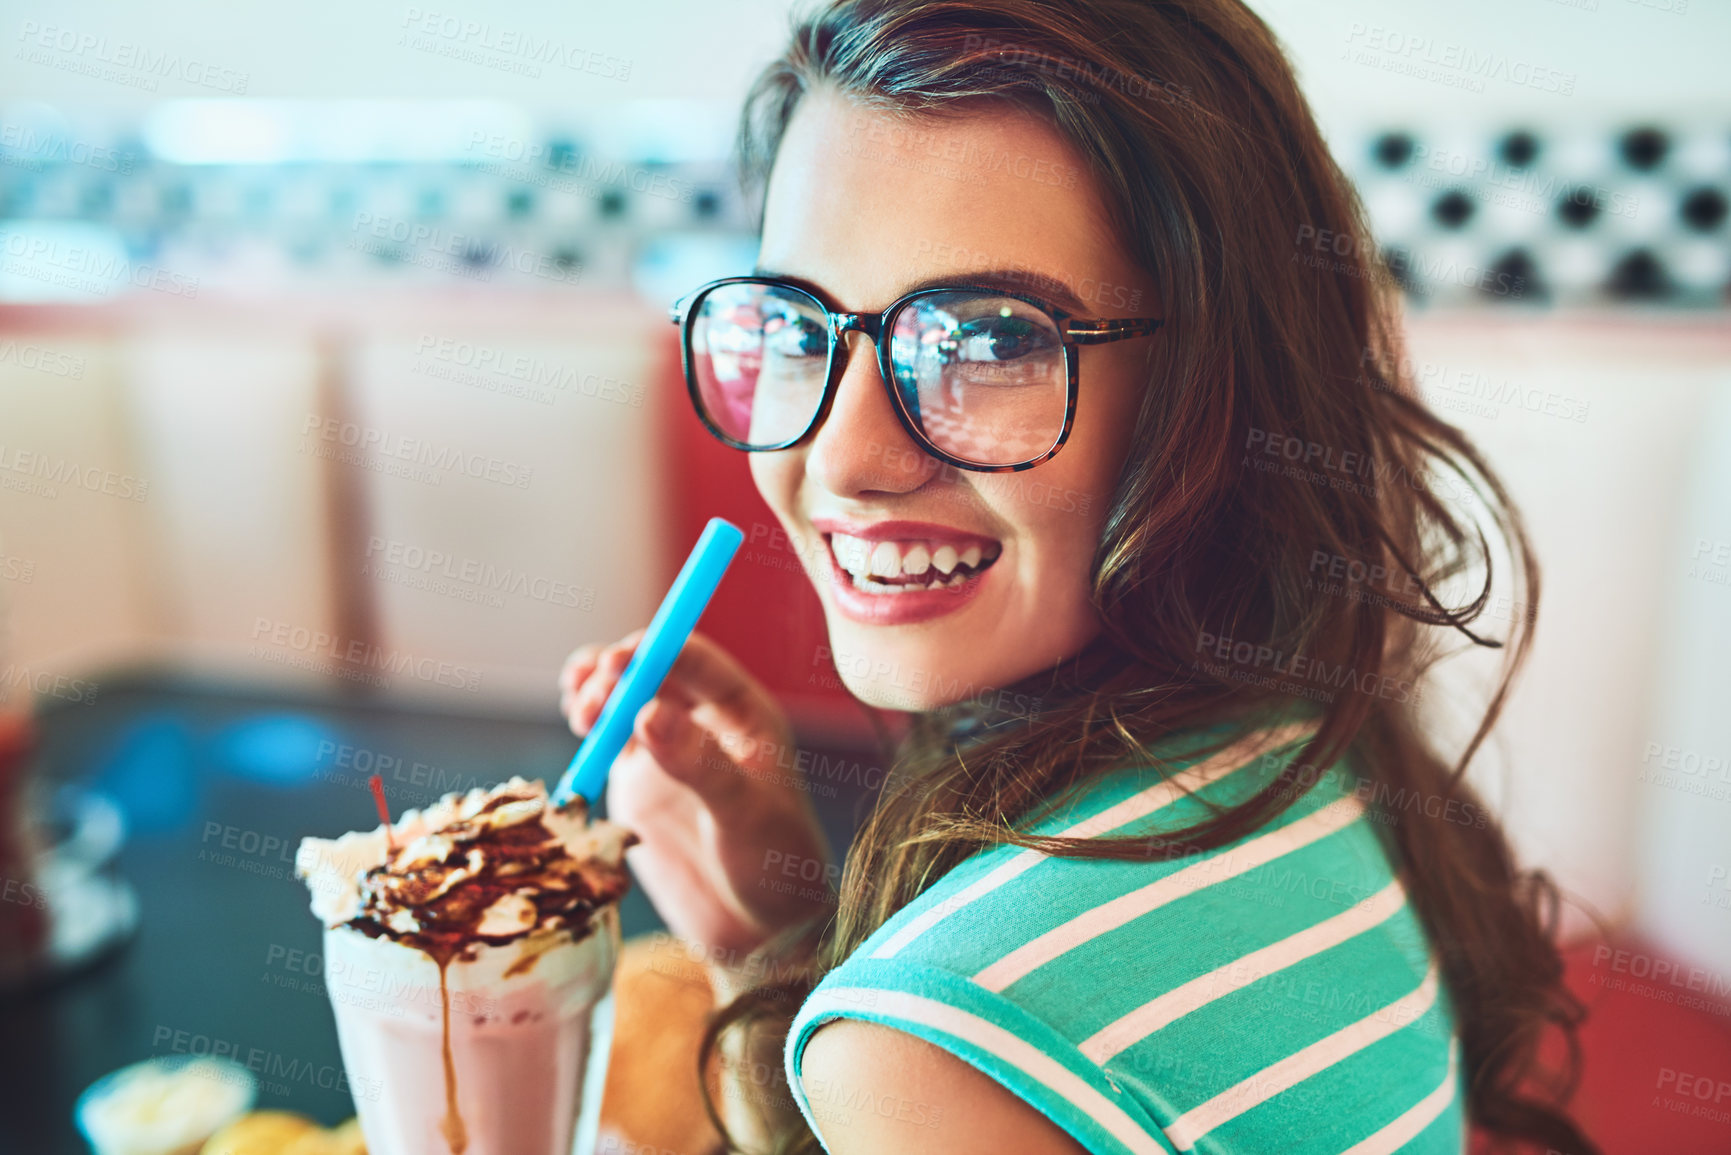 Buy stock photo Cropped portrait of an attractive young woman enjoying a milkshake in a retro diner